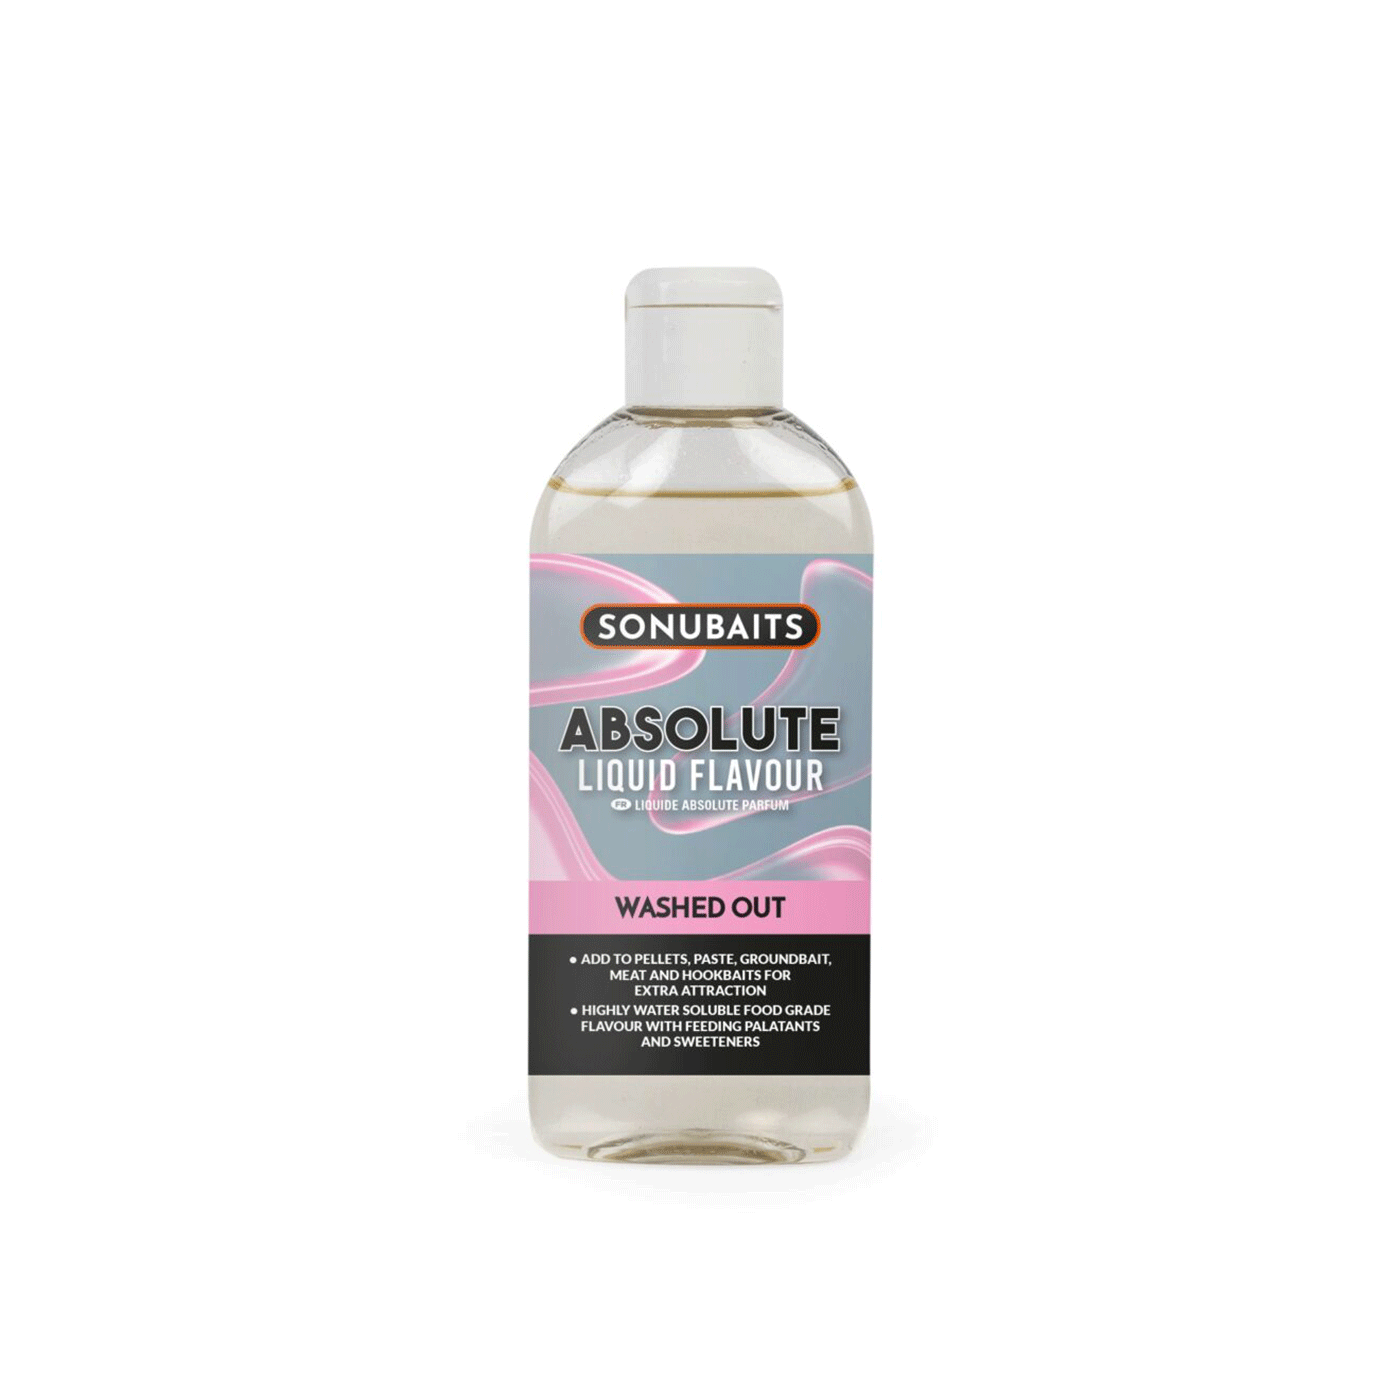 SONUBAITS - ABSOLUTE LIQUID FLAVOR WASHED OUT 200ml